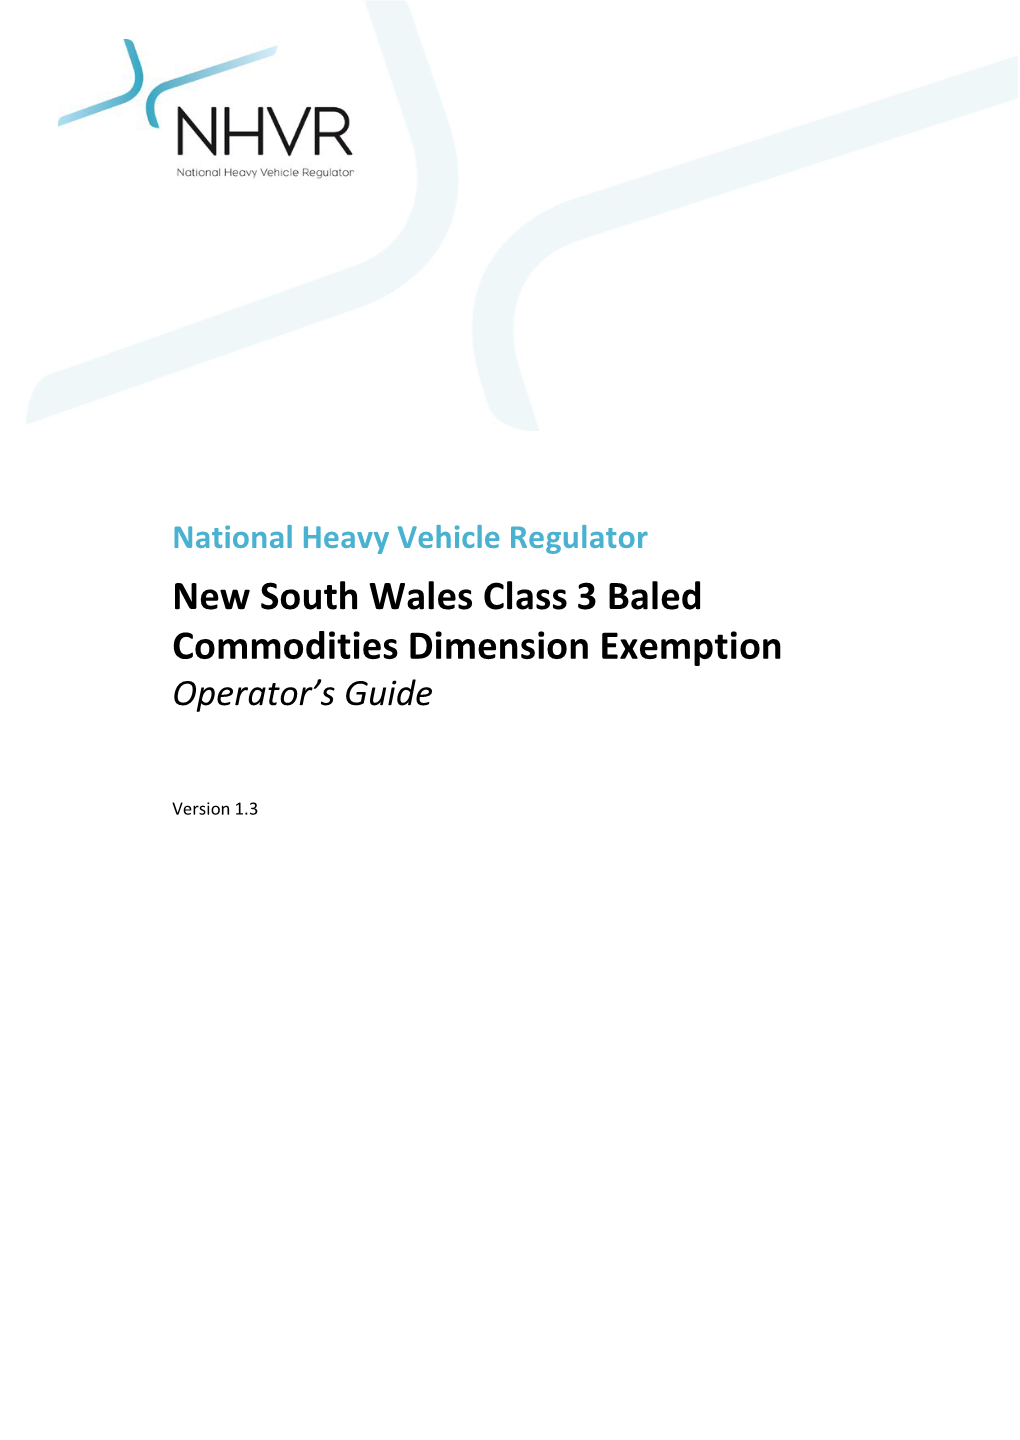 New South Wales Class 3 Baled Commodities Dimension Exemption Operator’S Guide